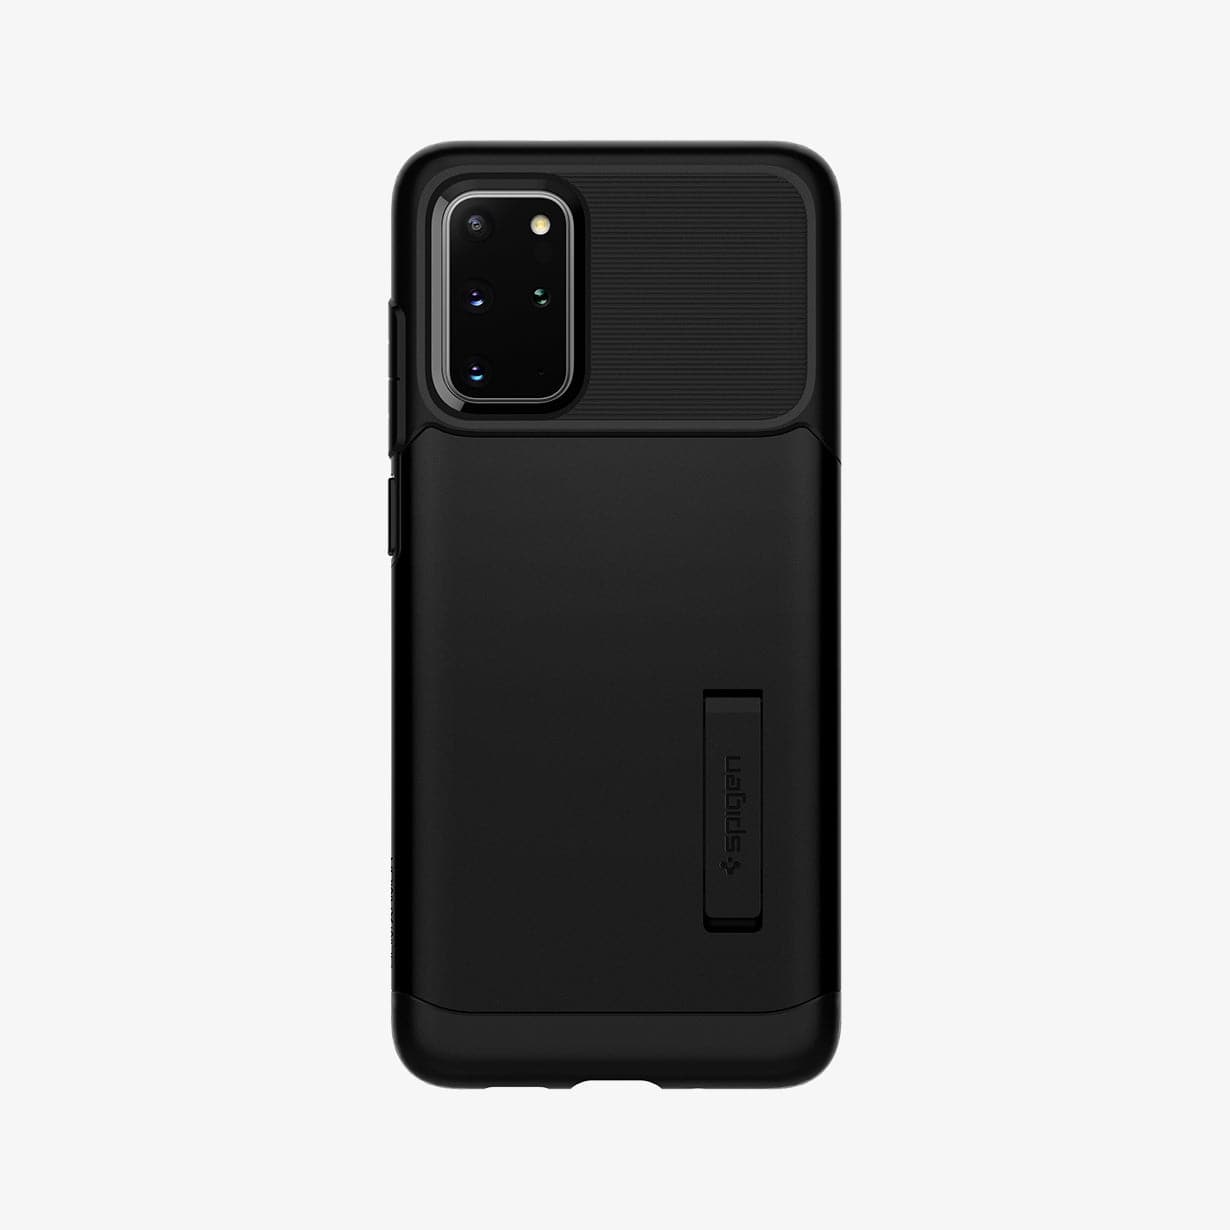 ACS00647 - Galaxy S20 Plus Slim Armor Case in black showing the back